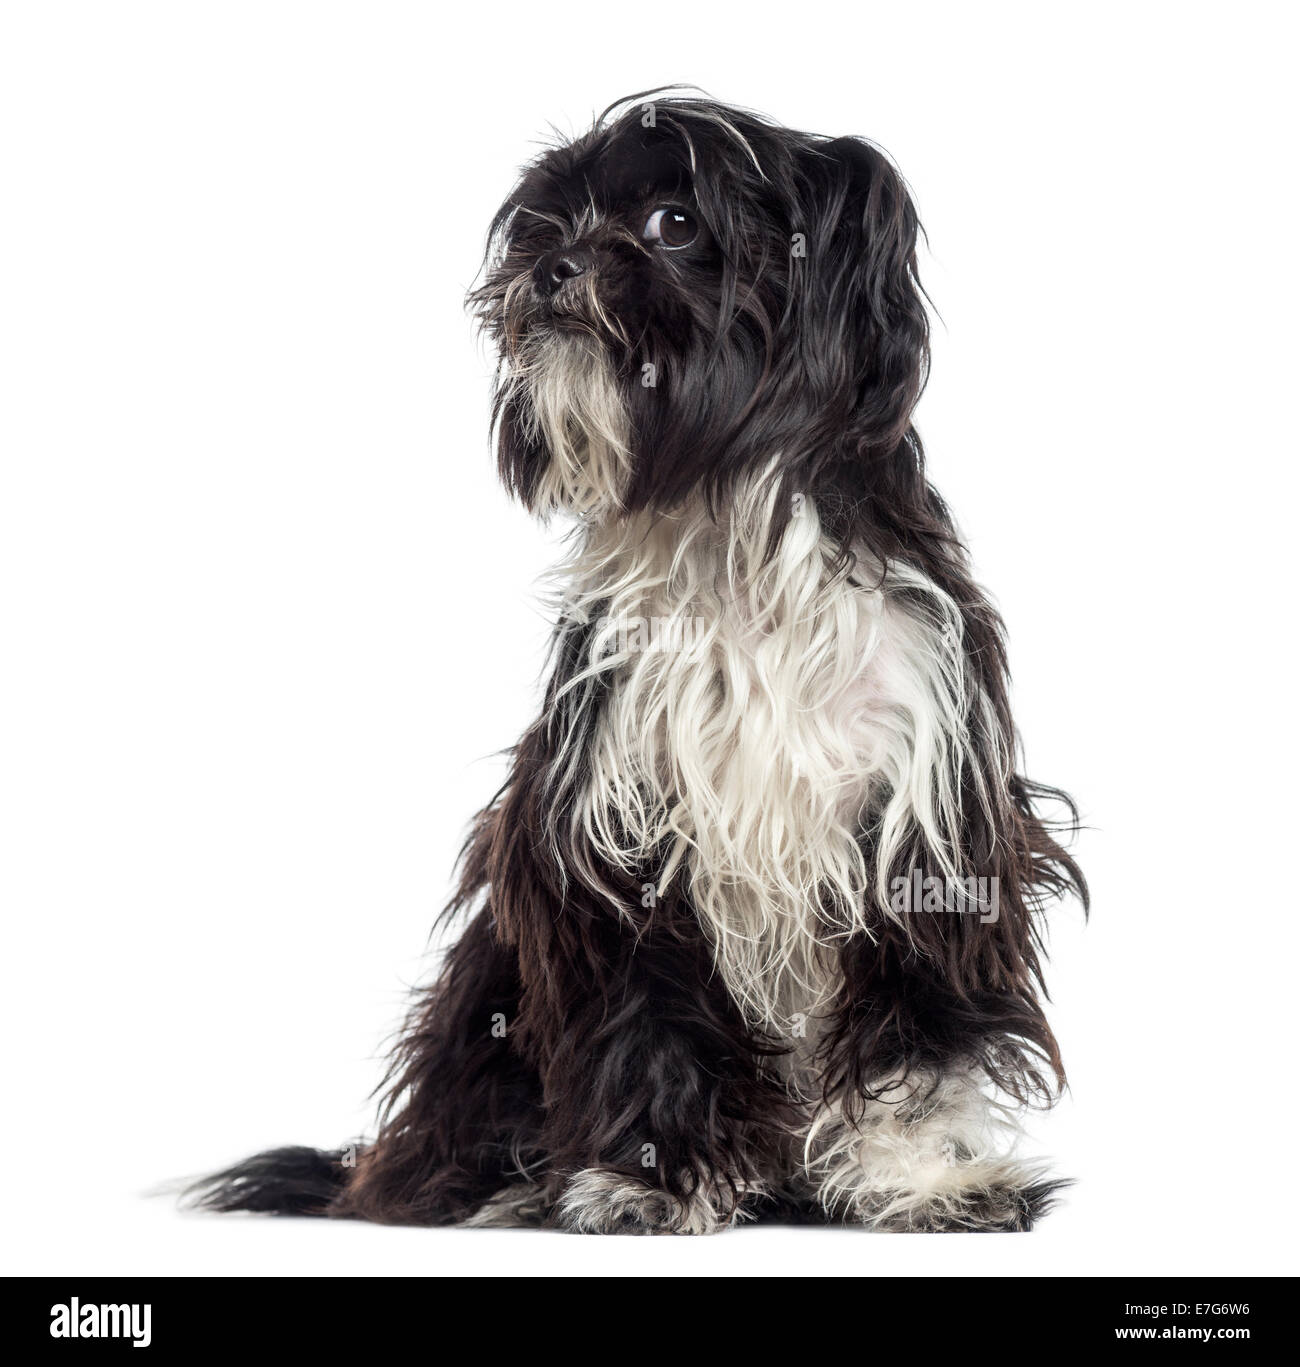 Shaggy Shih Tzu questioning (9 months old) against white background Stock Photo